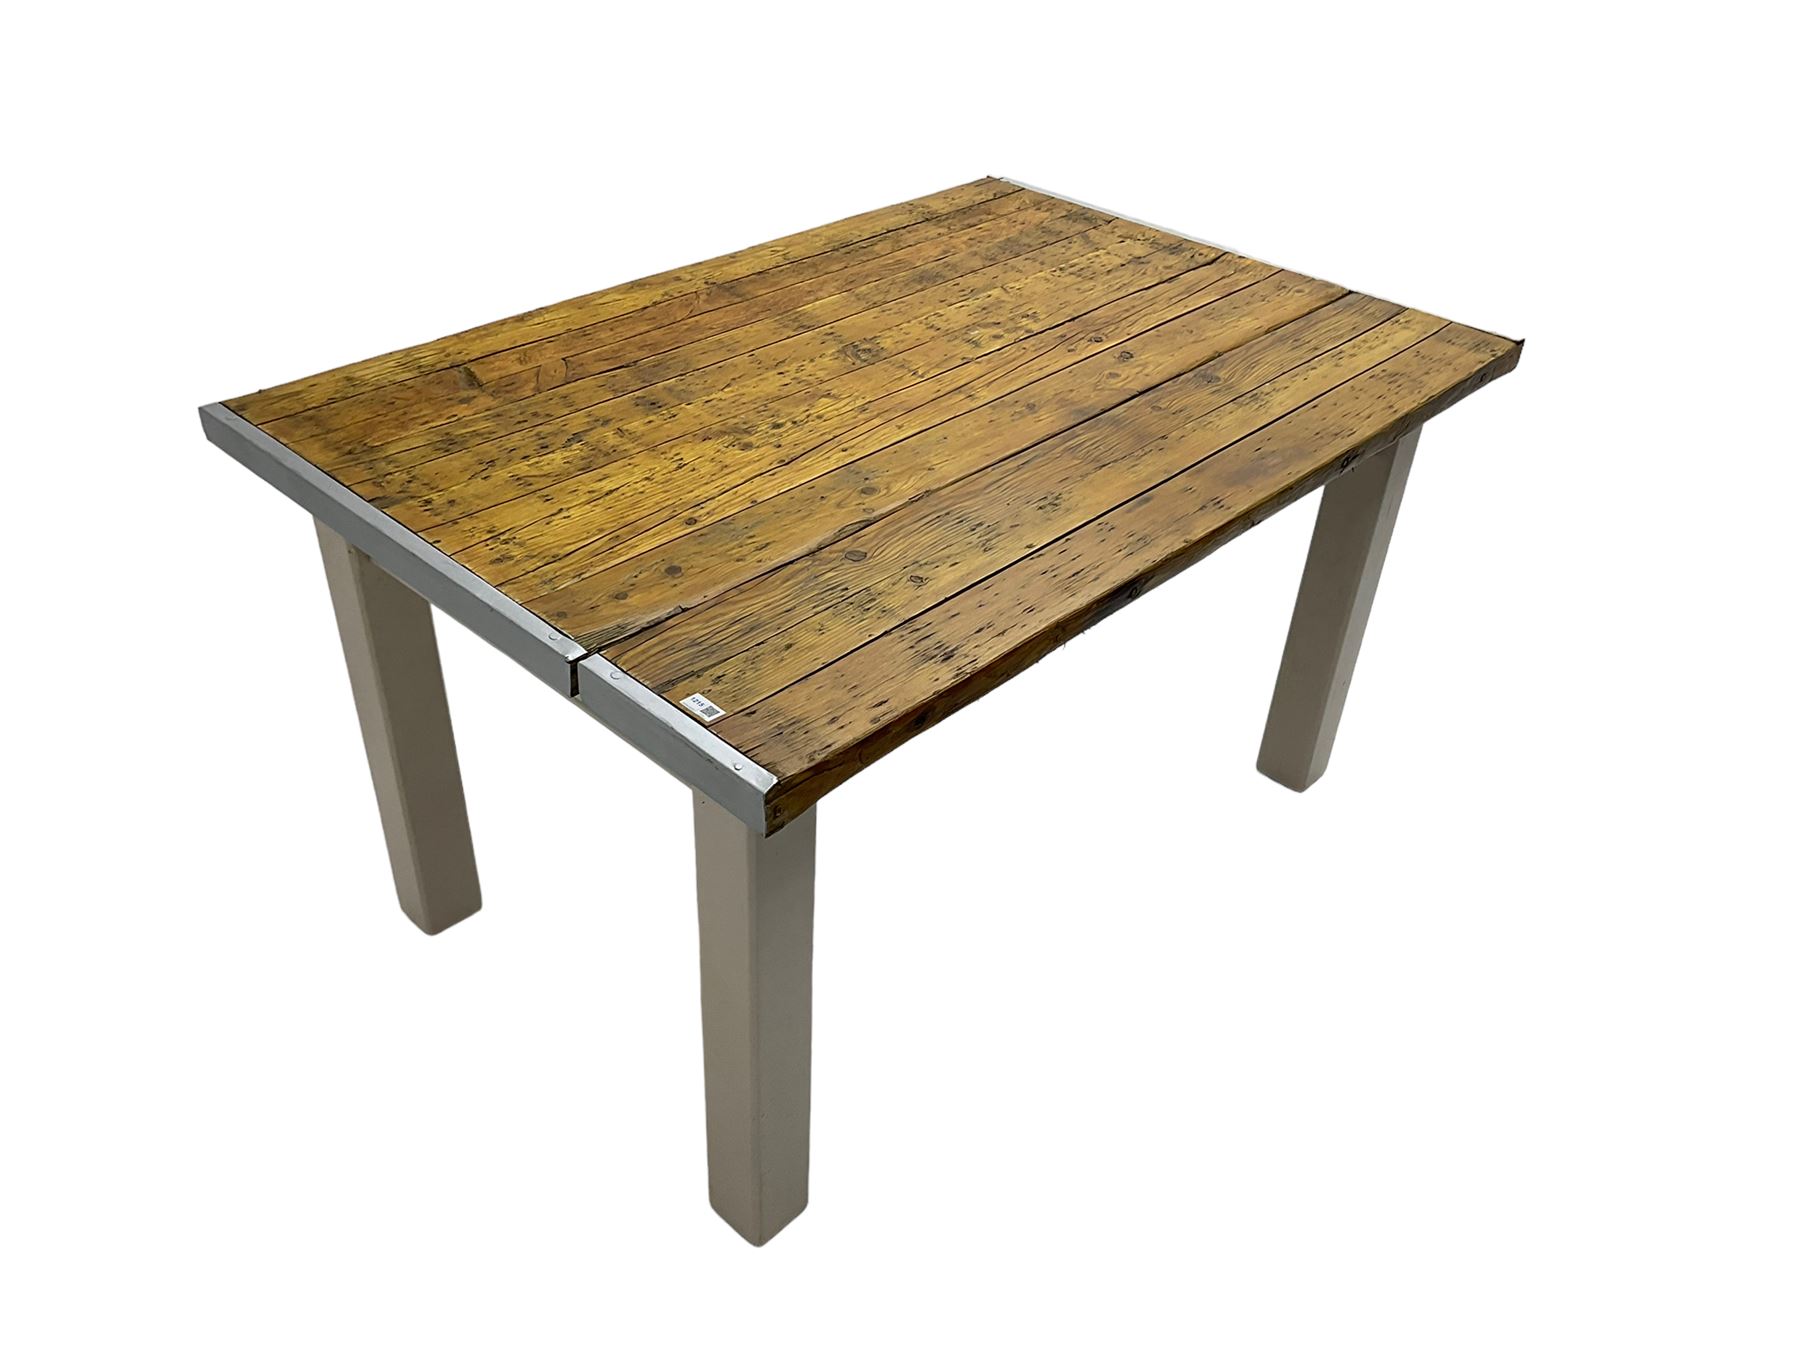 Rustic pine dining table - Image 4 of 6